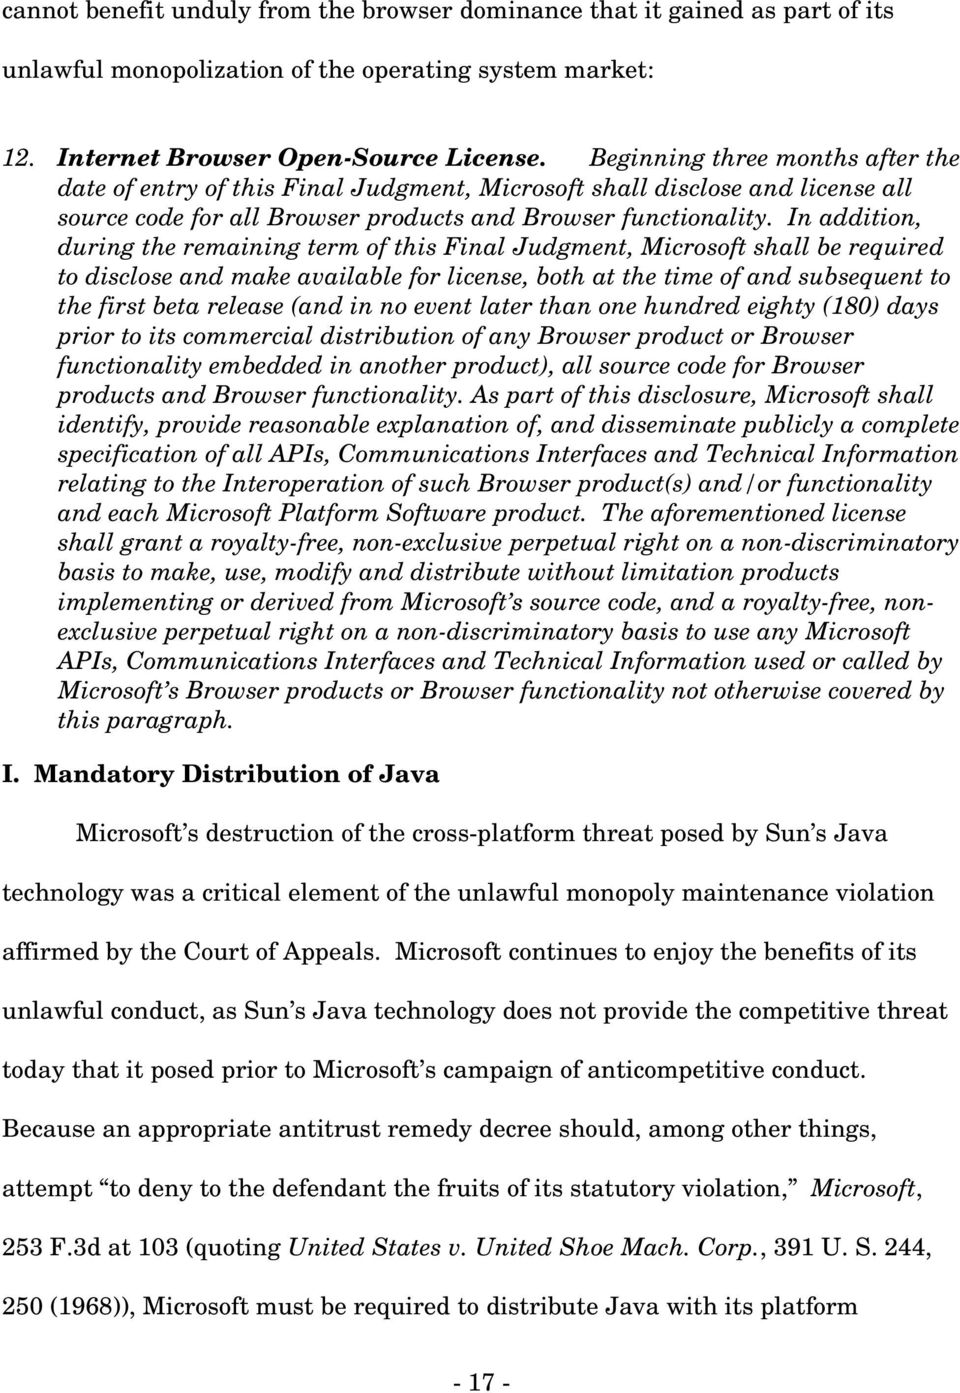 In addition, during the remaining term of this Final Judgment, Microsoft shall be required to disclose and make available for license, both at the time of and subsequent to the first beta release